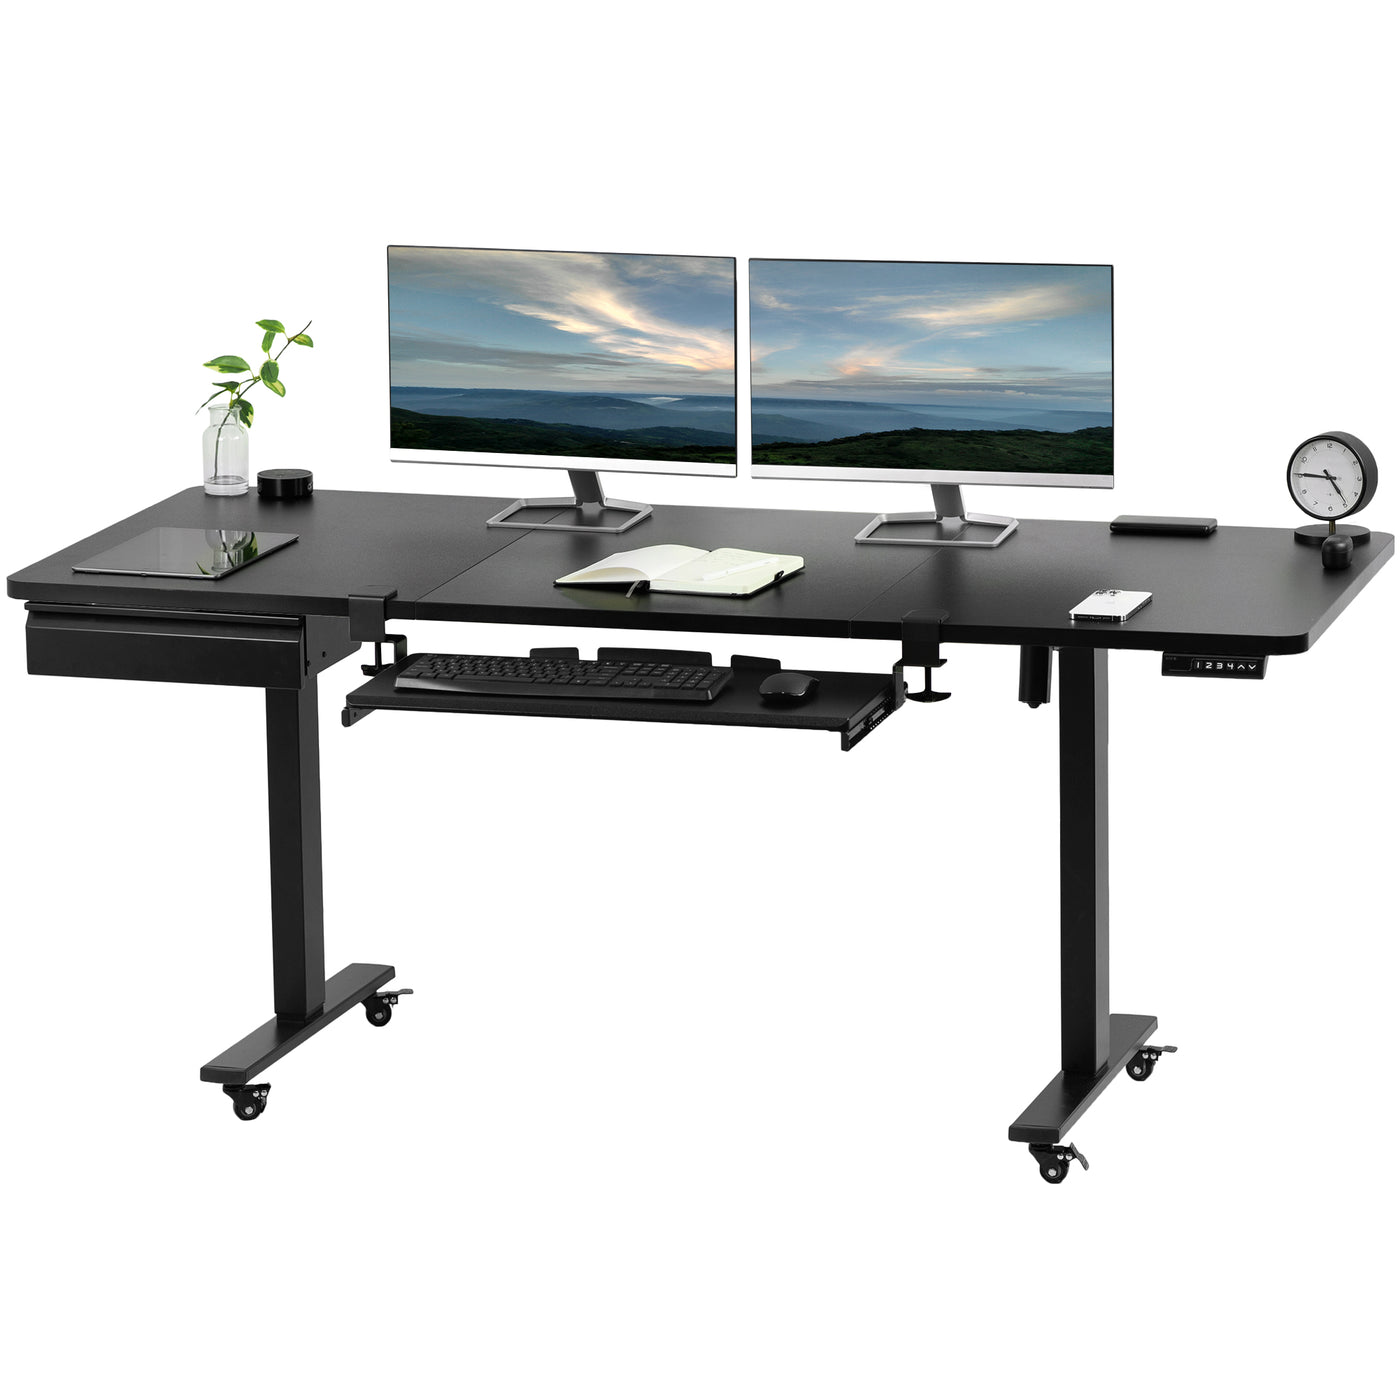 Large electric desk with under-desk drawer and sliding keyboard tray.